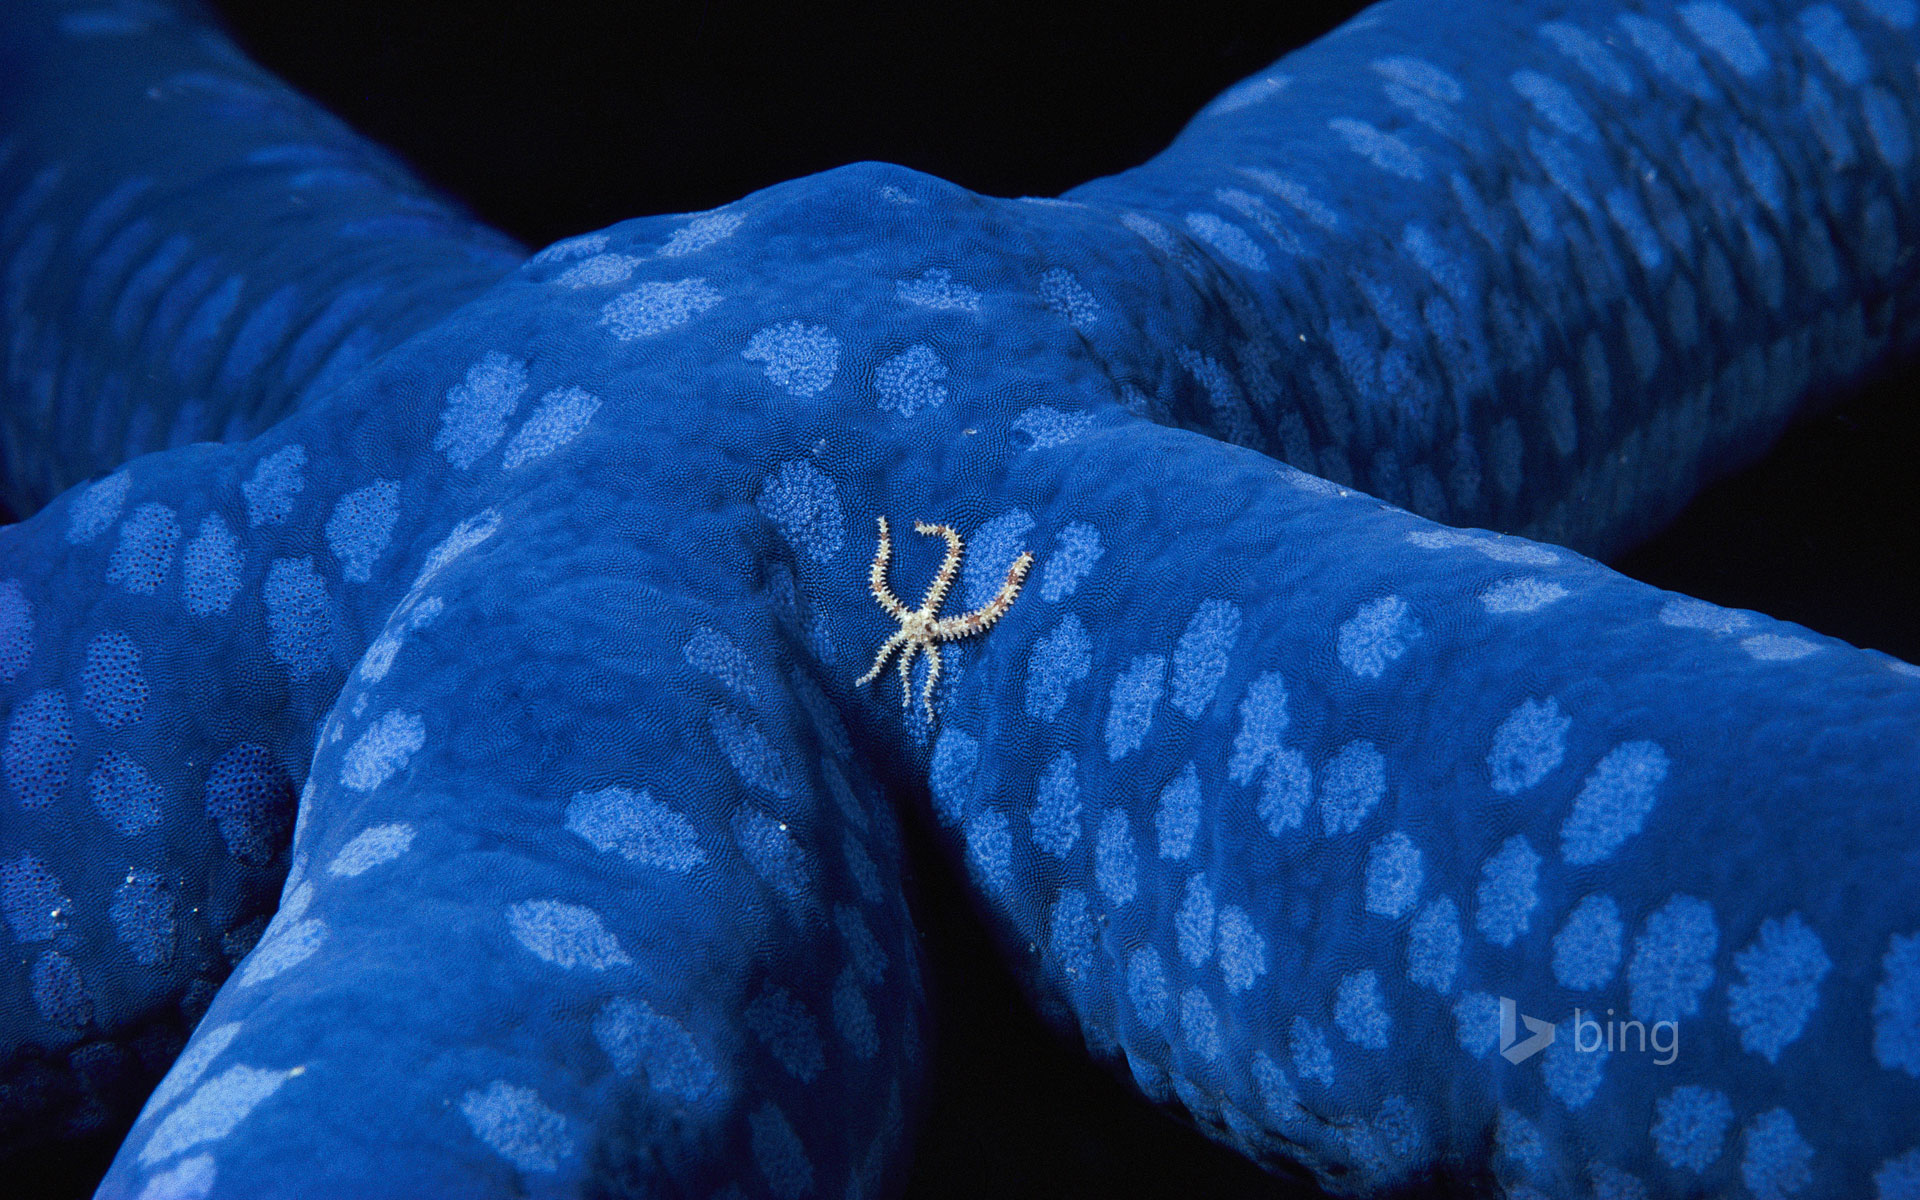 A brittle star wanders across a blue sea star off the coast of the Solomon Islands